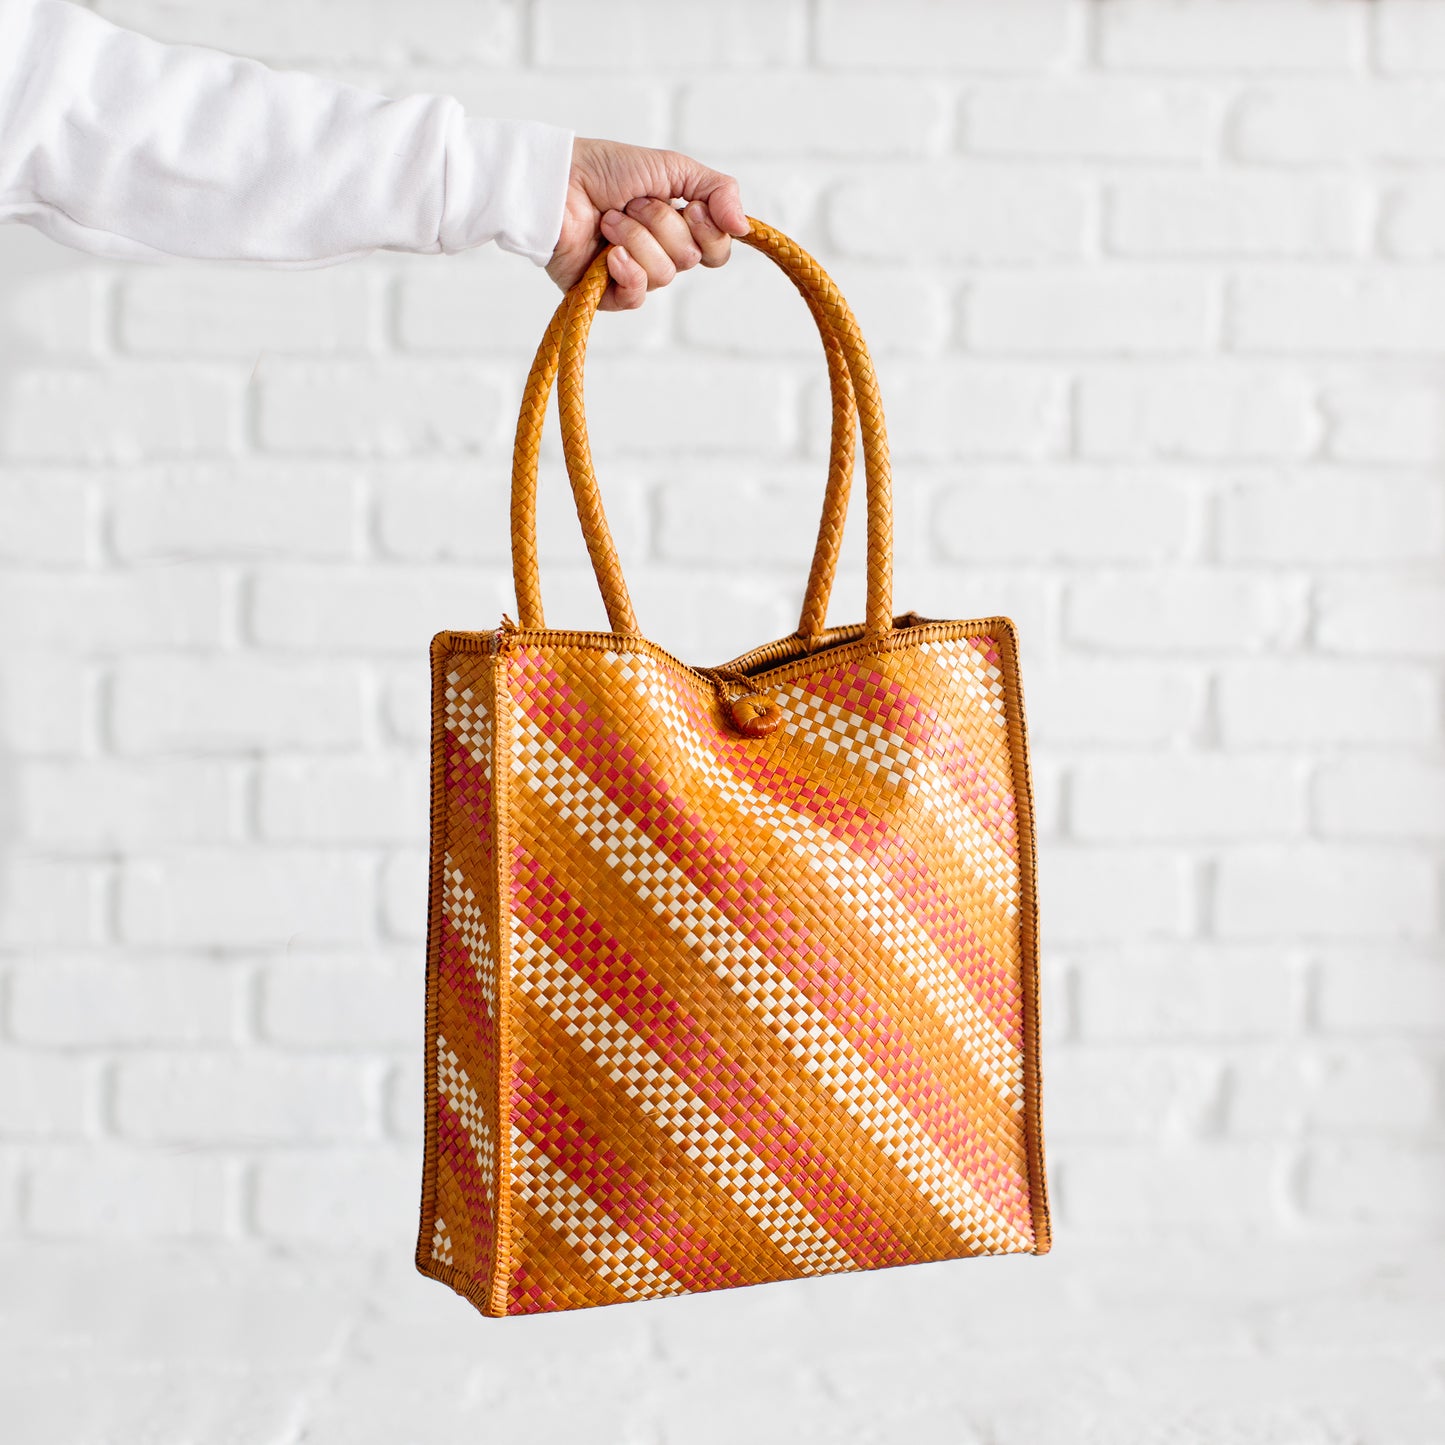 Handwoven Market Thip Tote